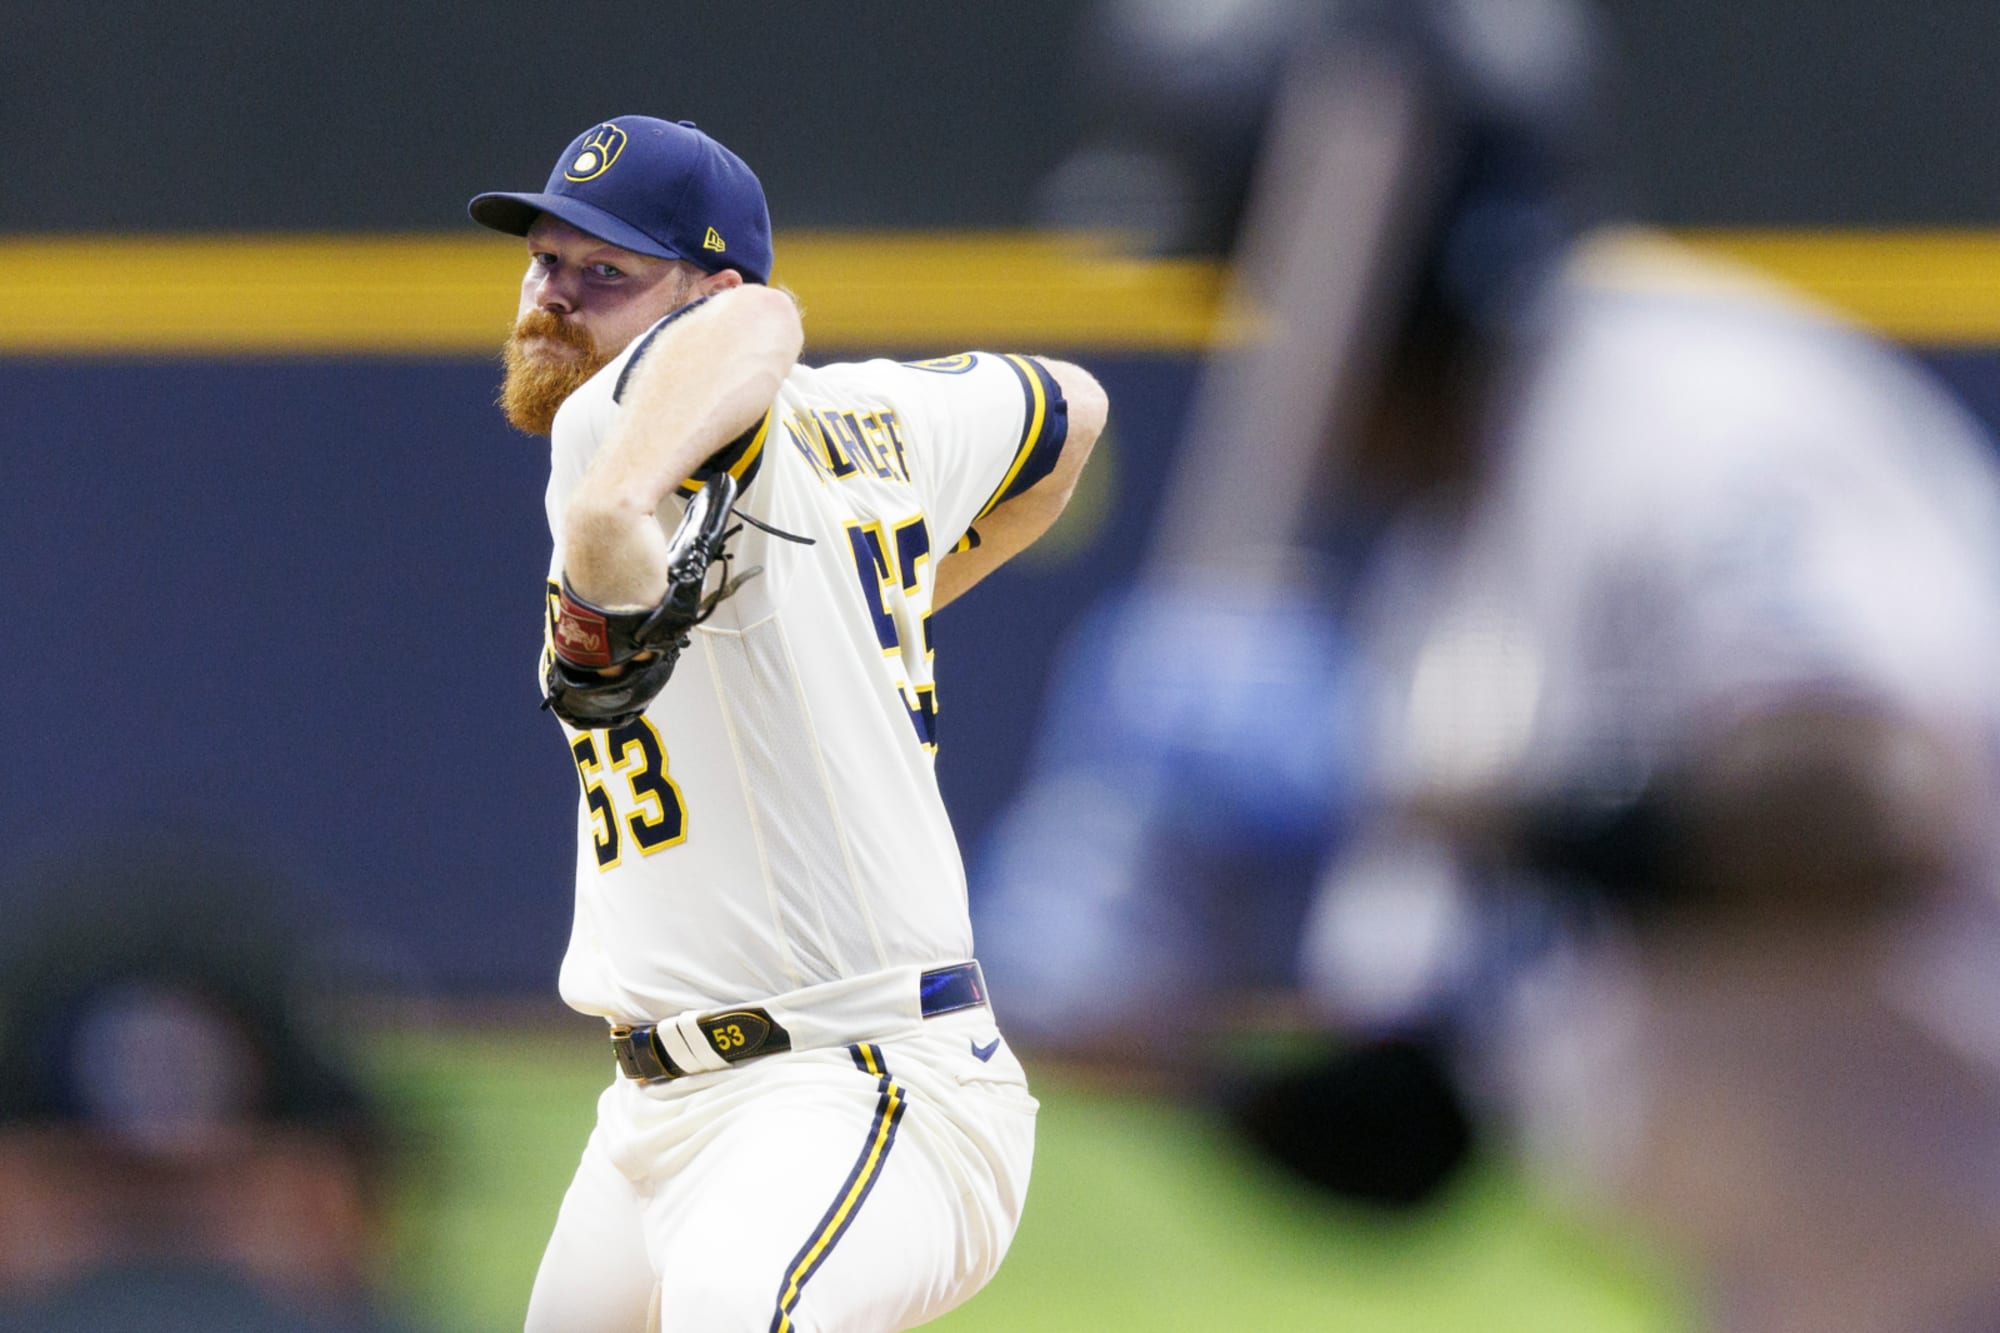 Brewers: What Are The Salary Arbitration Projections For 2022?